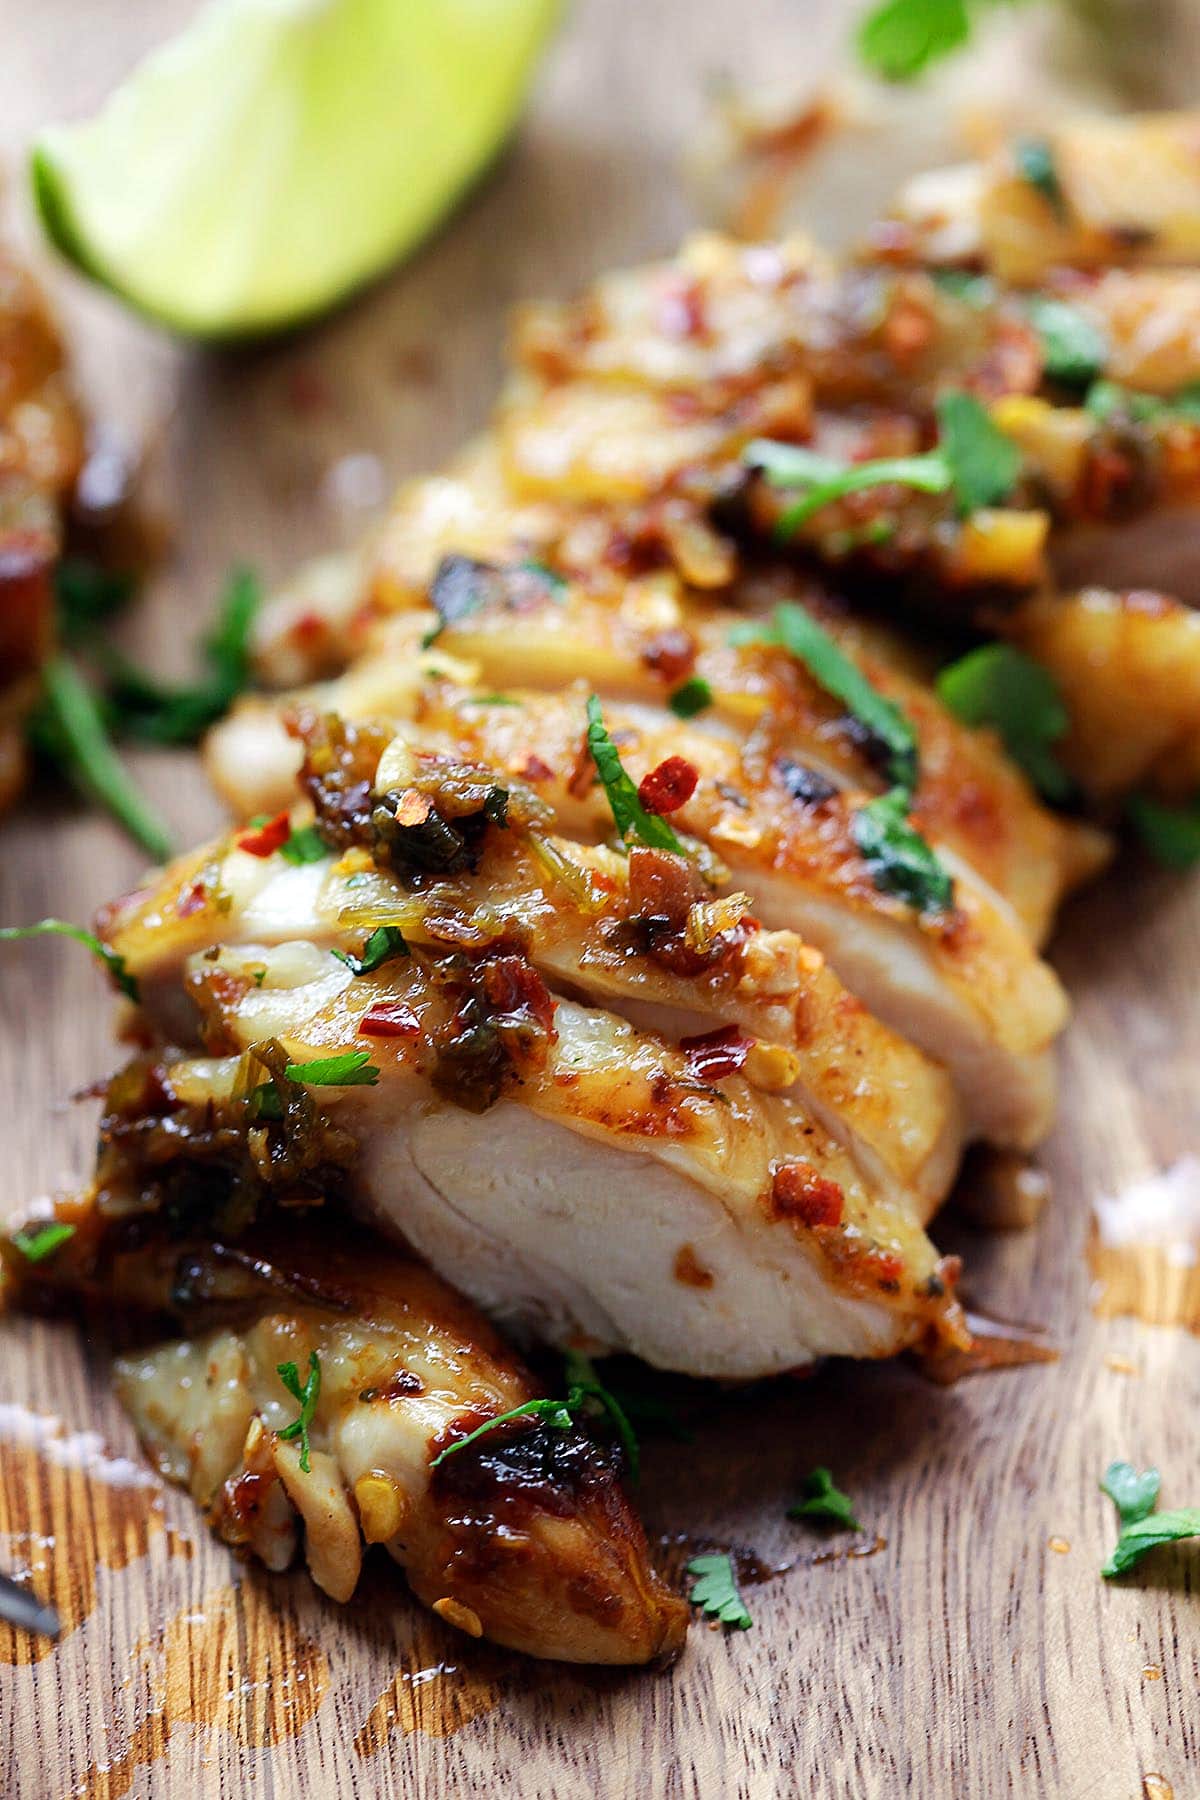 Grilled cilantro lime chicken served with lime wedges.